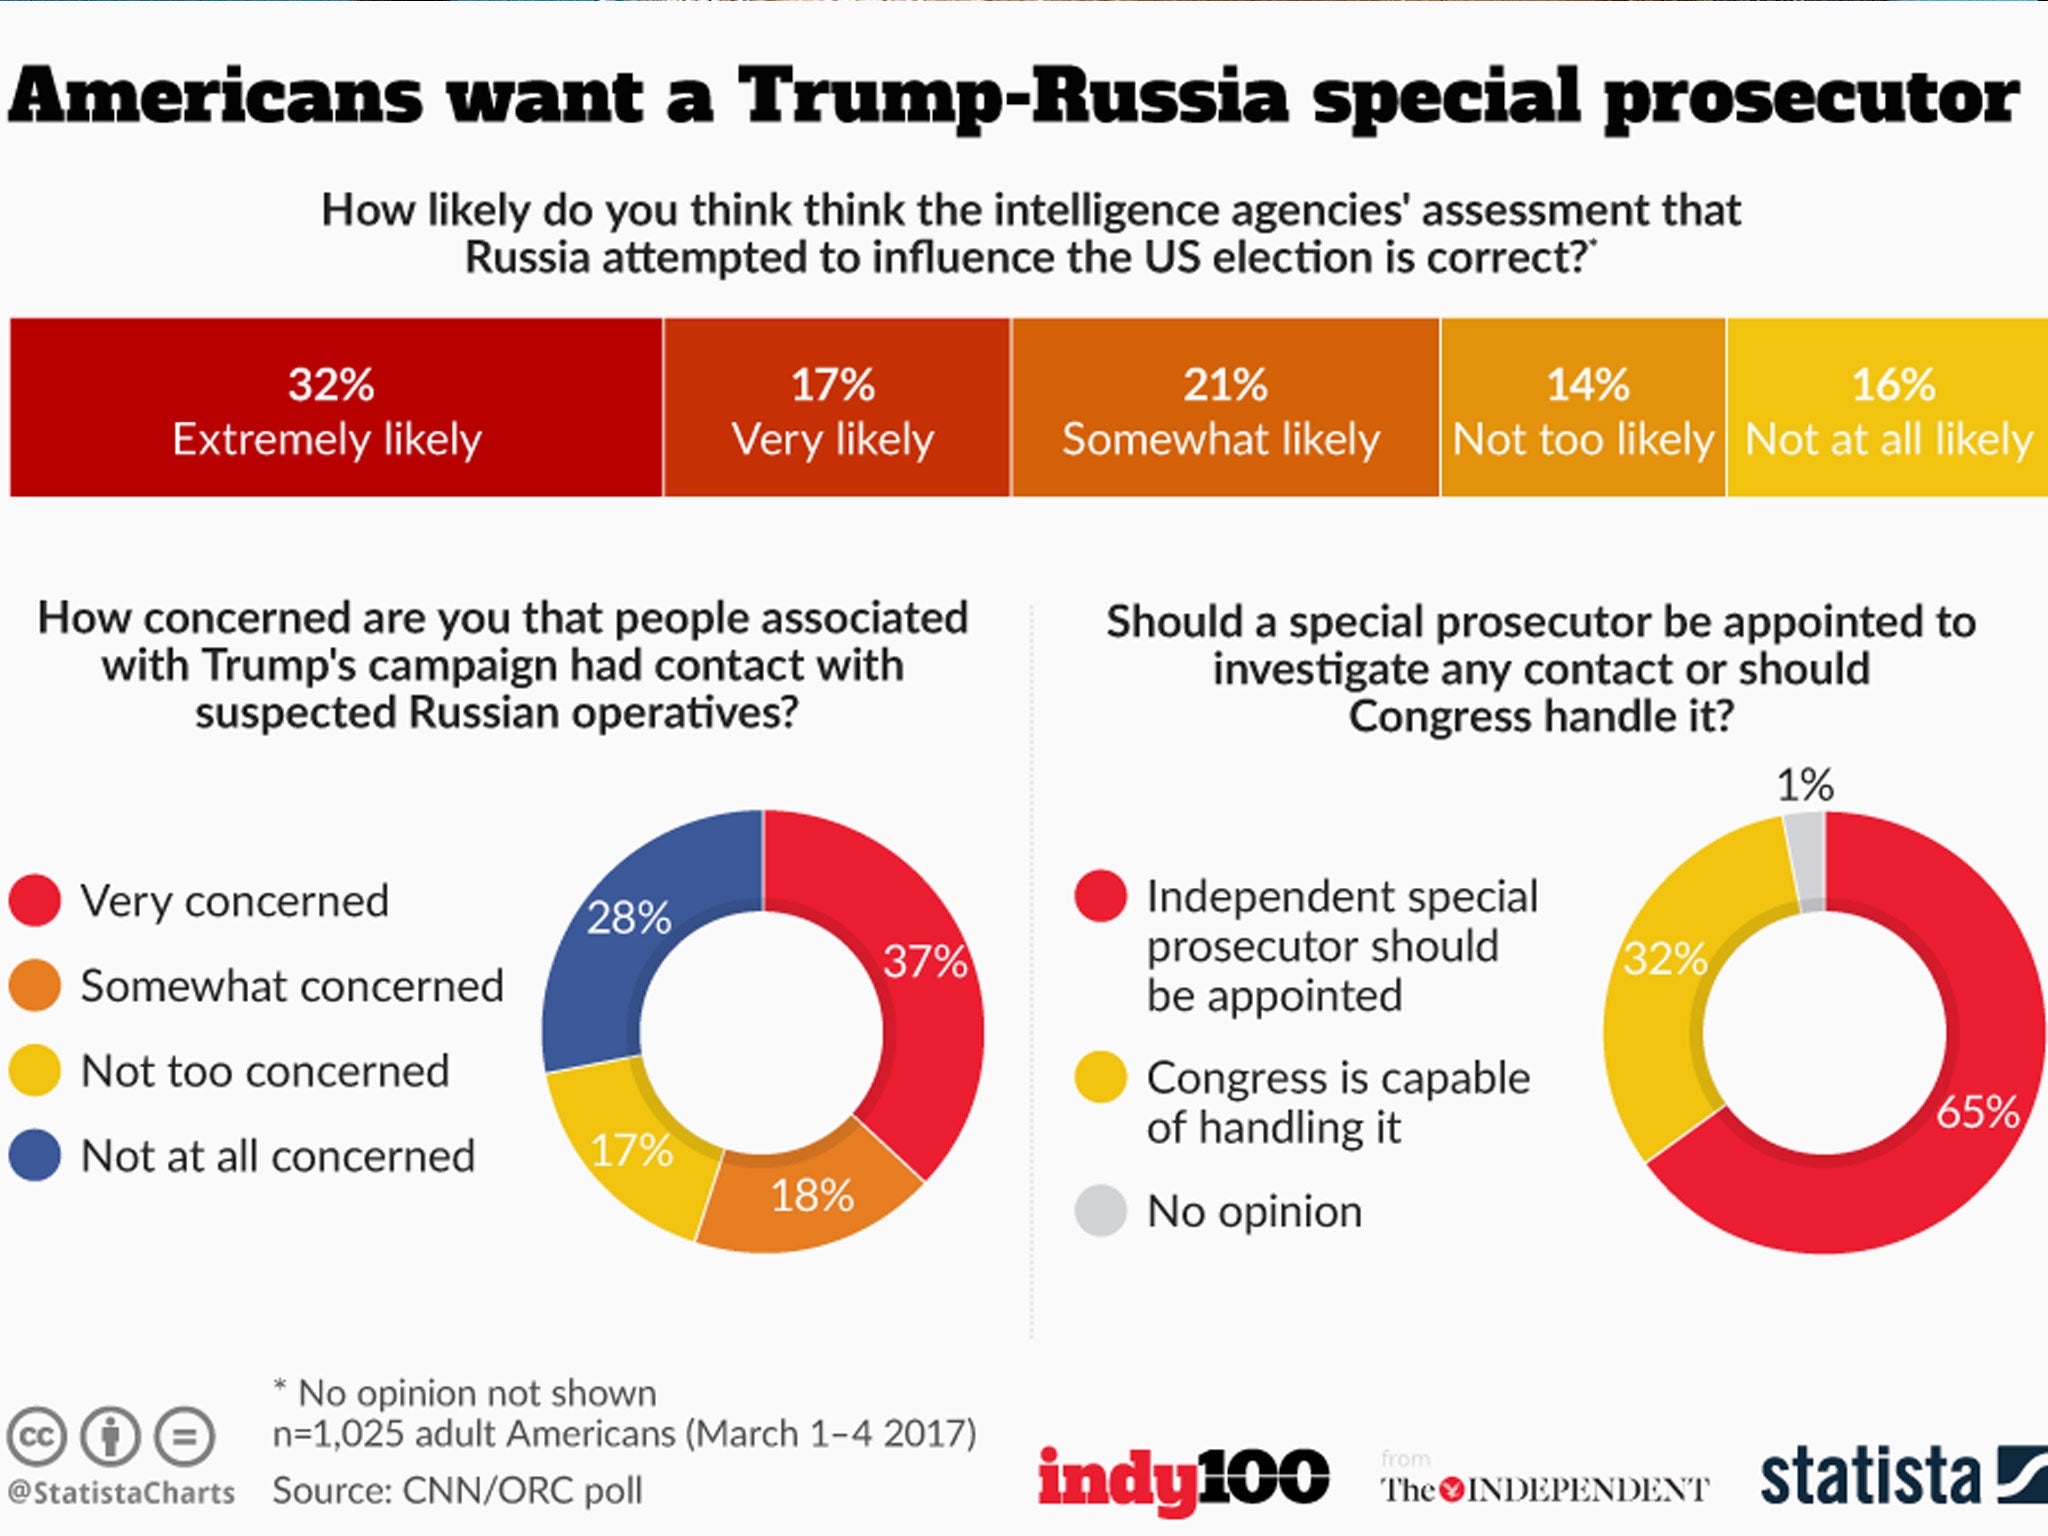 A graph showing the attitudes of Americans on Donald Trump's alleged links to Russia